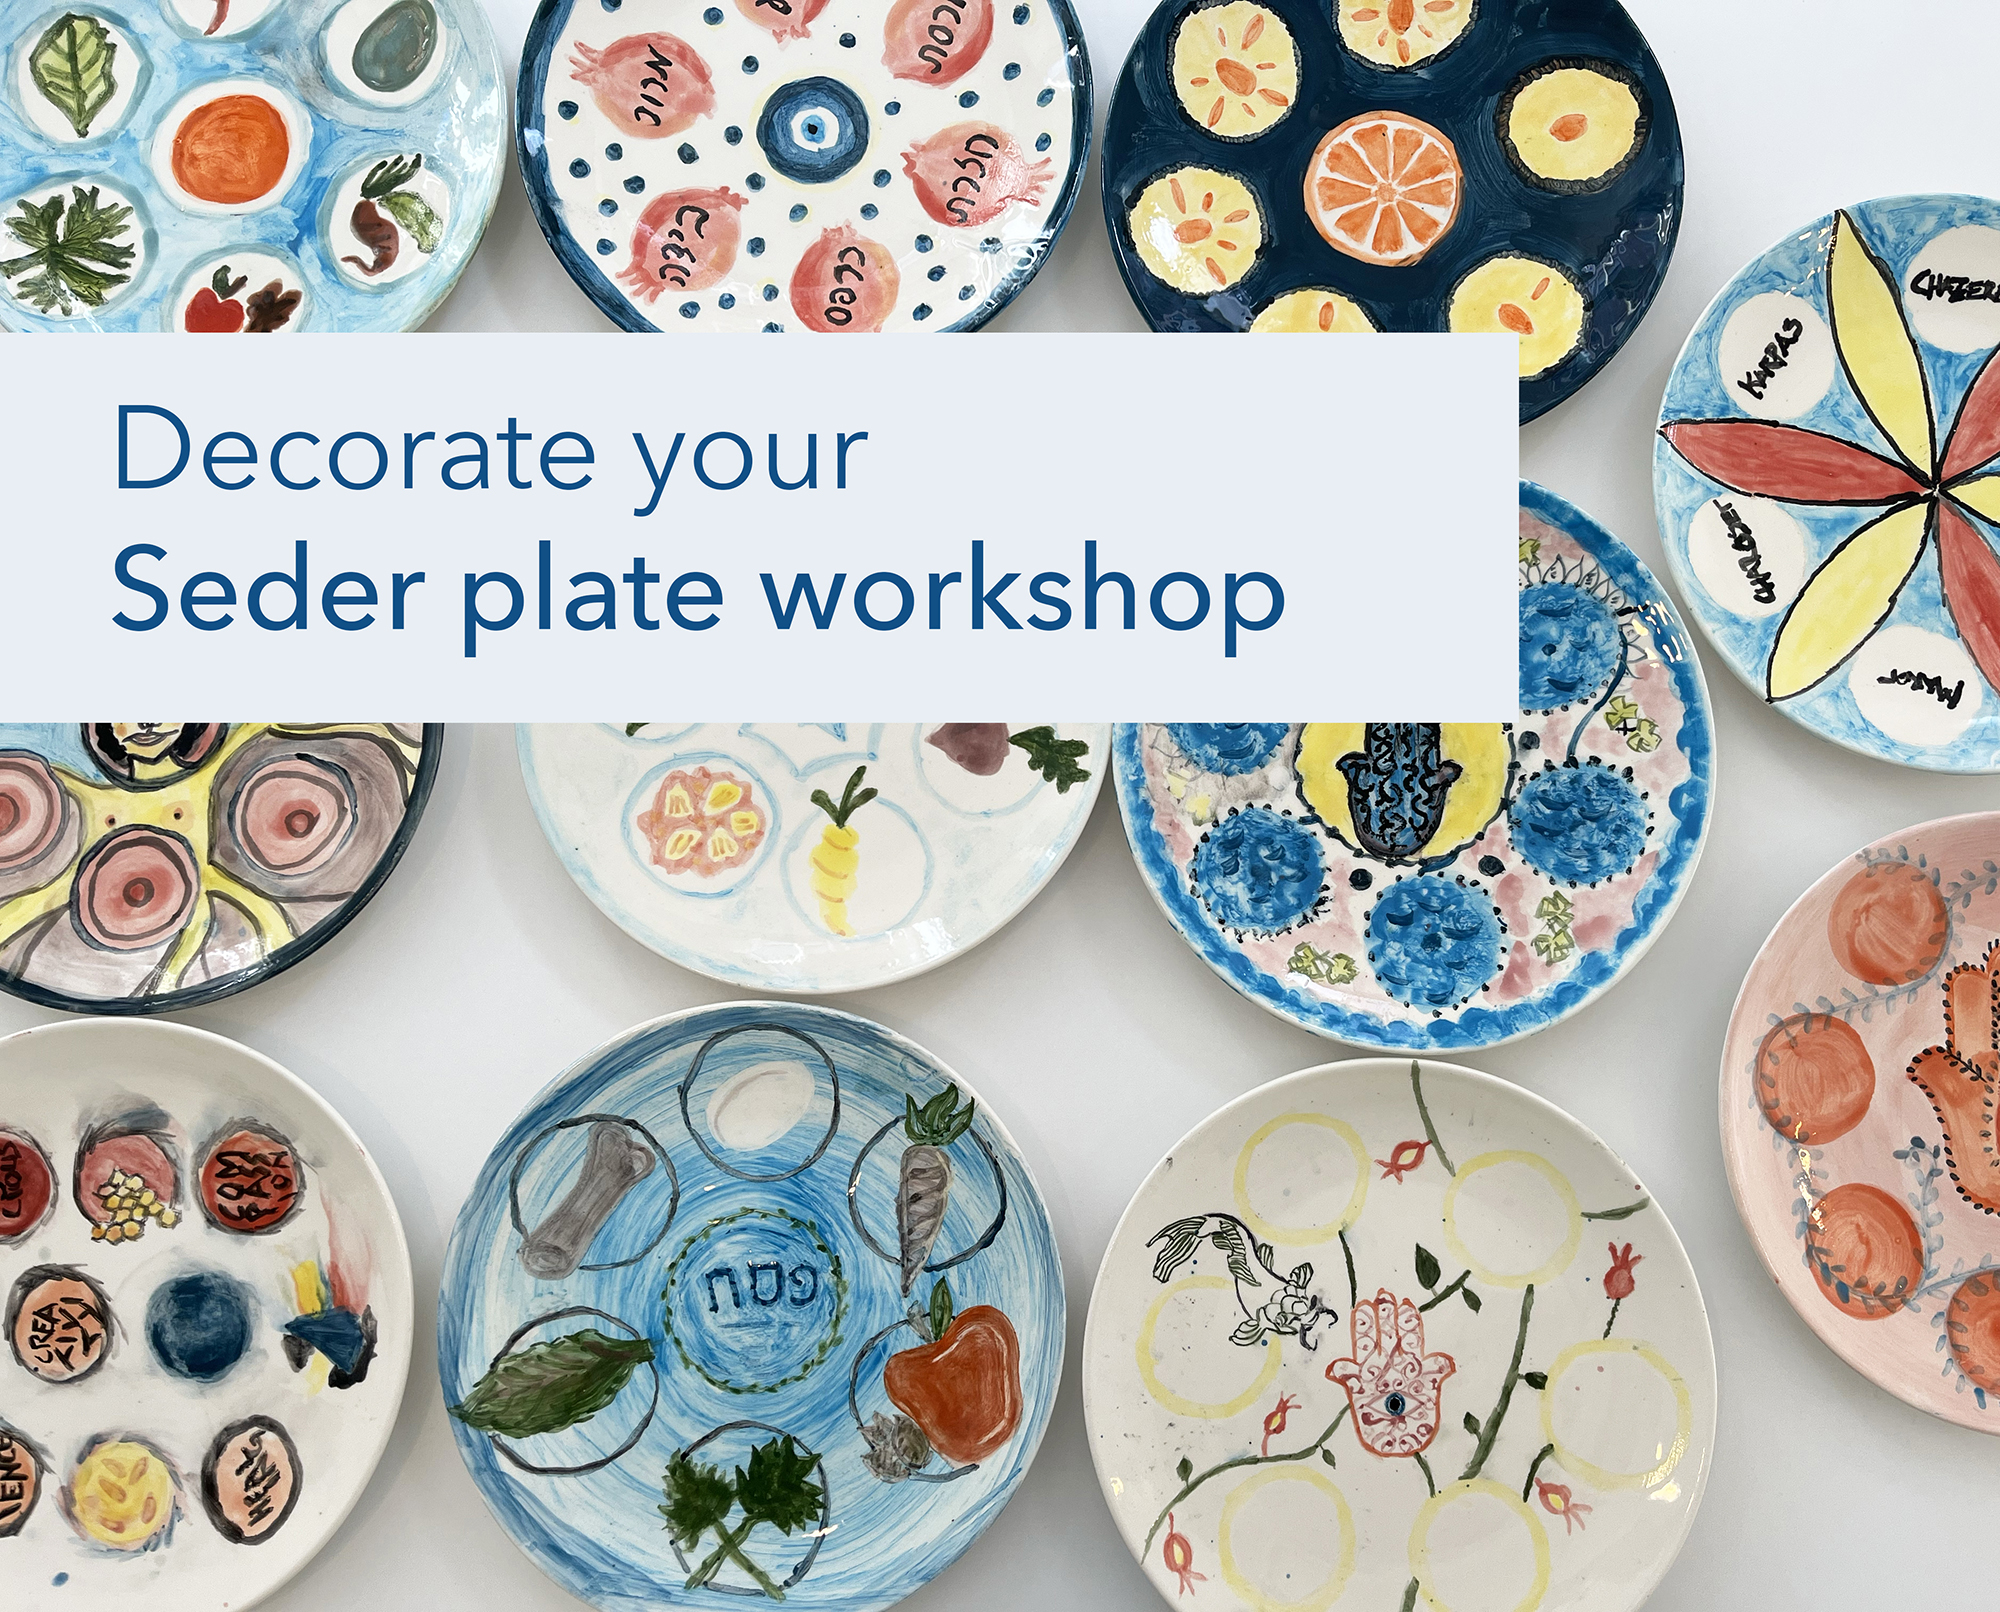 Multi-colored hand-painted seder plates